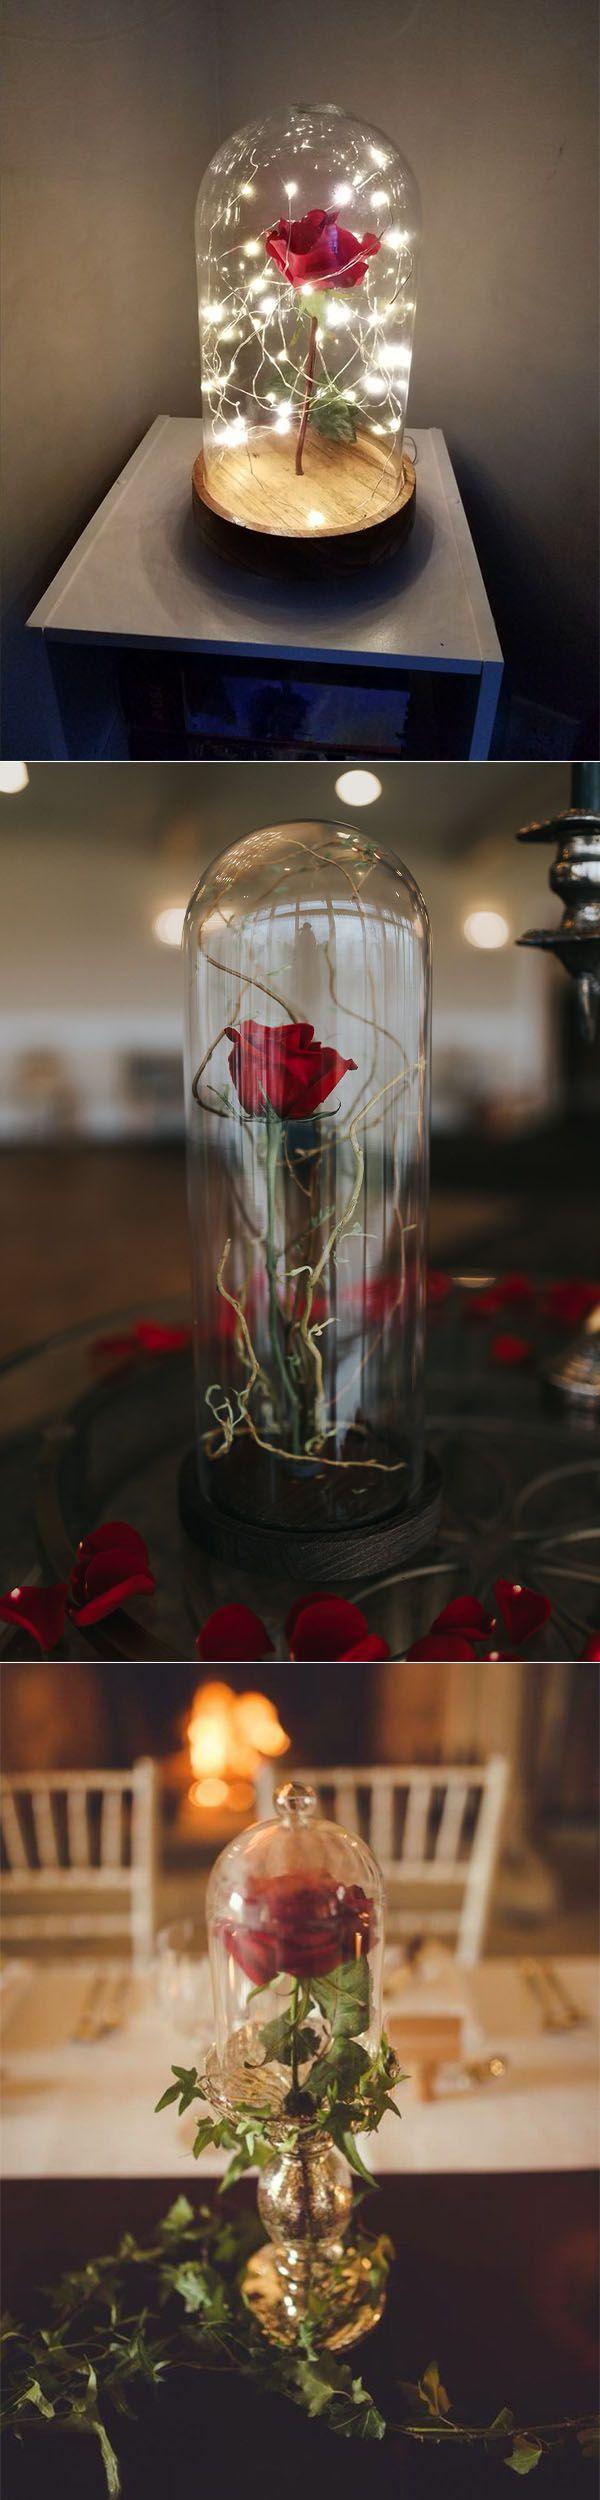 Wedding - 30 Charming Beauty And The Beast Inspired Fairy Tale Wedding Ideas